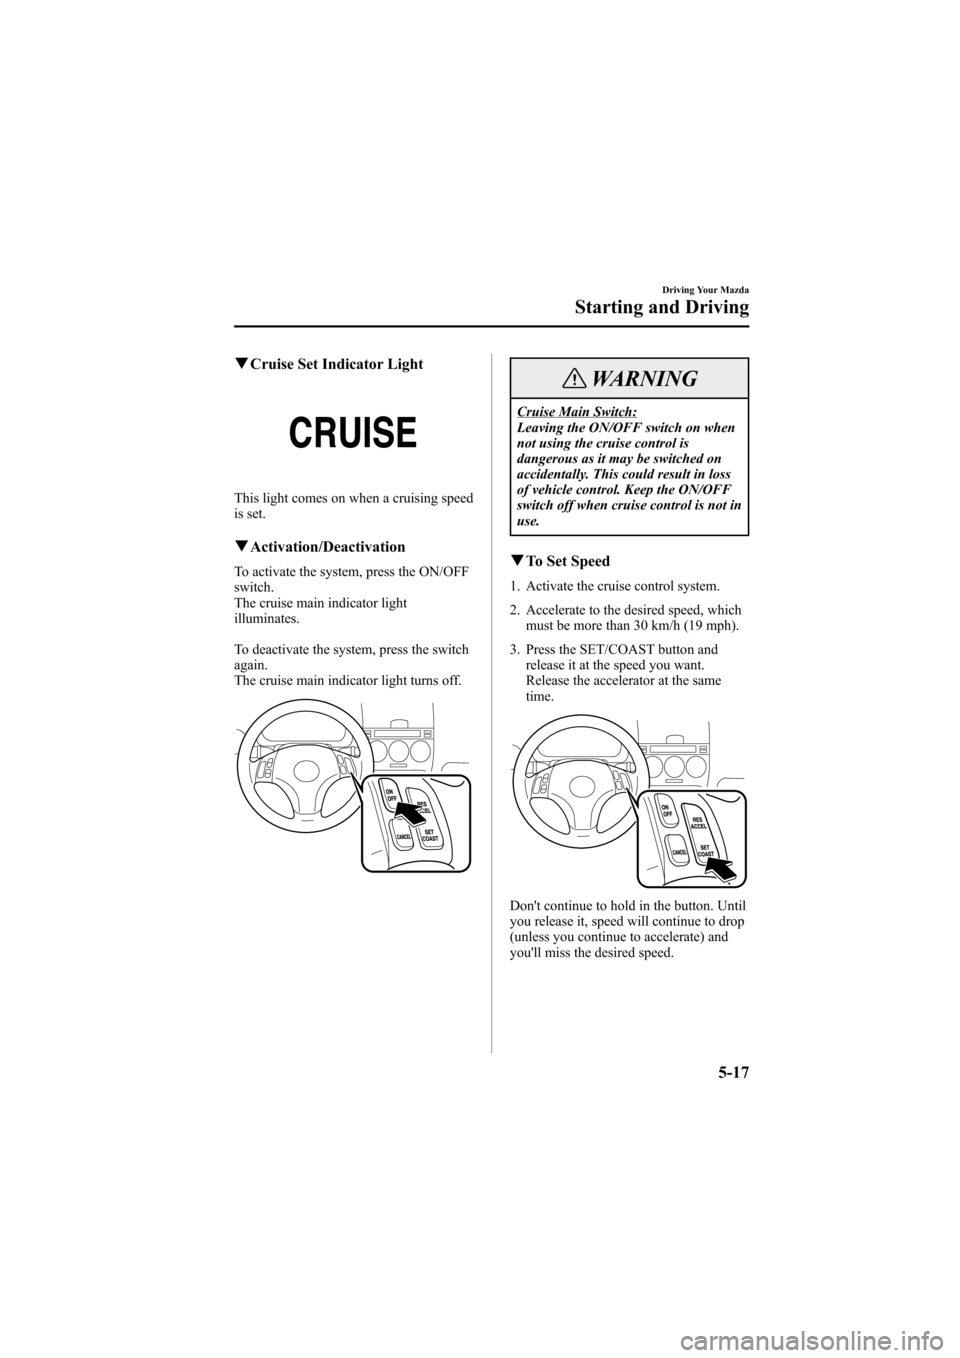 MAZDA MODEL 6 2005  Owners Manual (in English) Black plate (141,1)
qCruise Set Indicator Light
This light comes on when a cruising speed
is set.
qActivation/Deactivation
To activate the system, press the ON/OFF
switch.
The cruise main indicator li